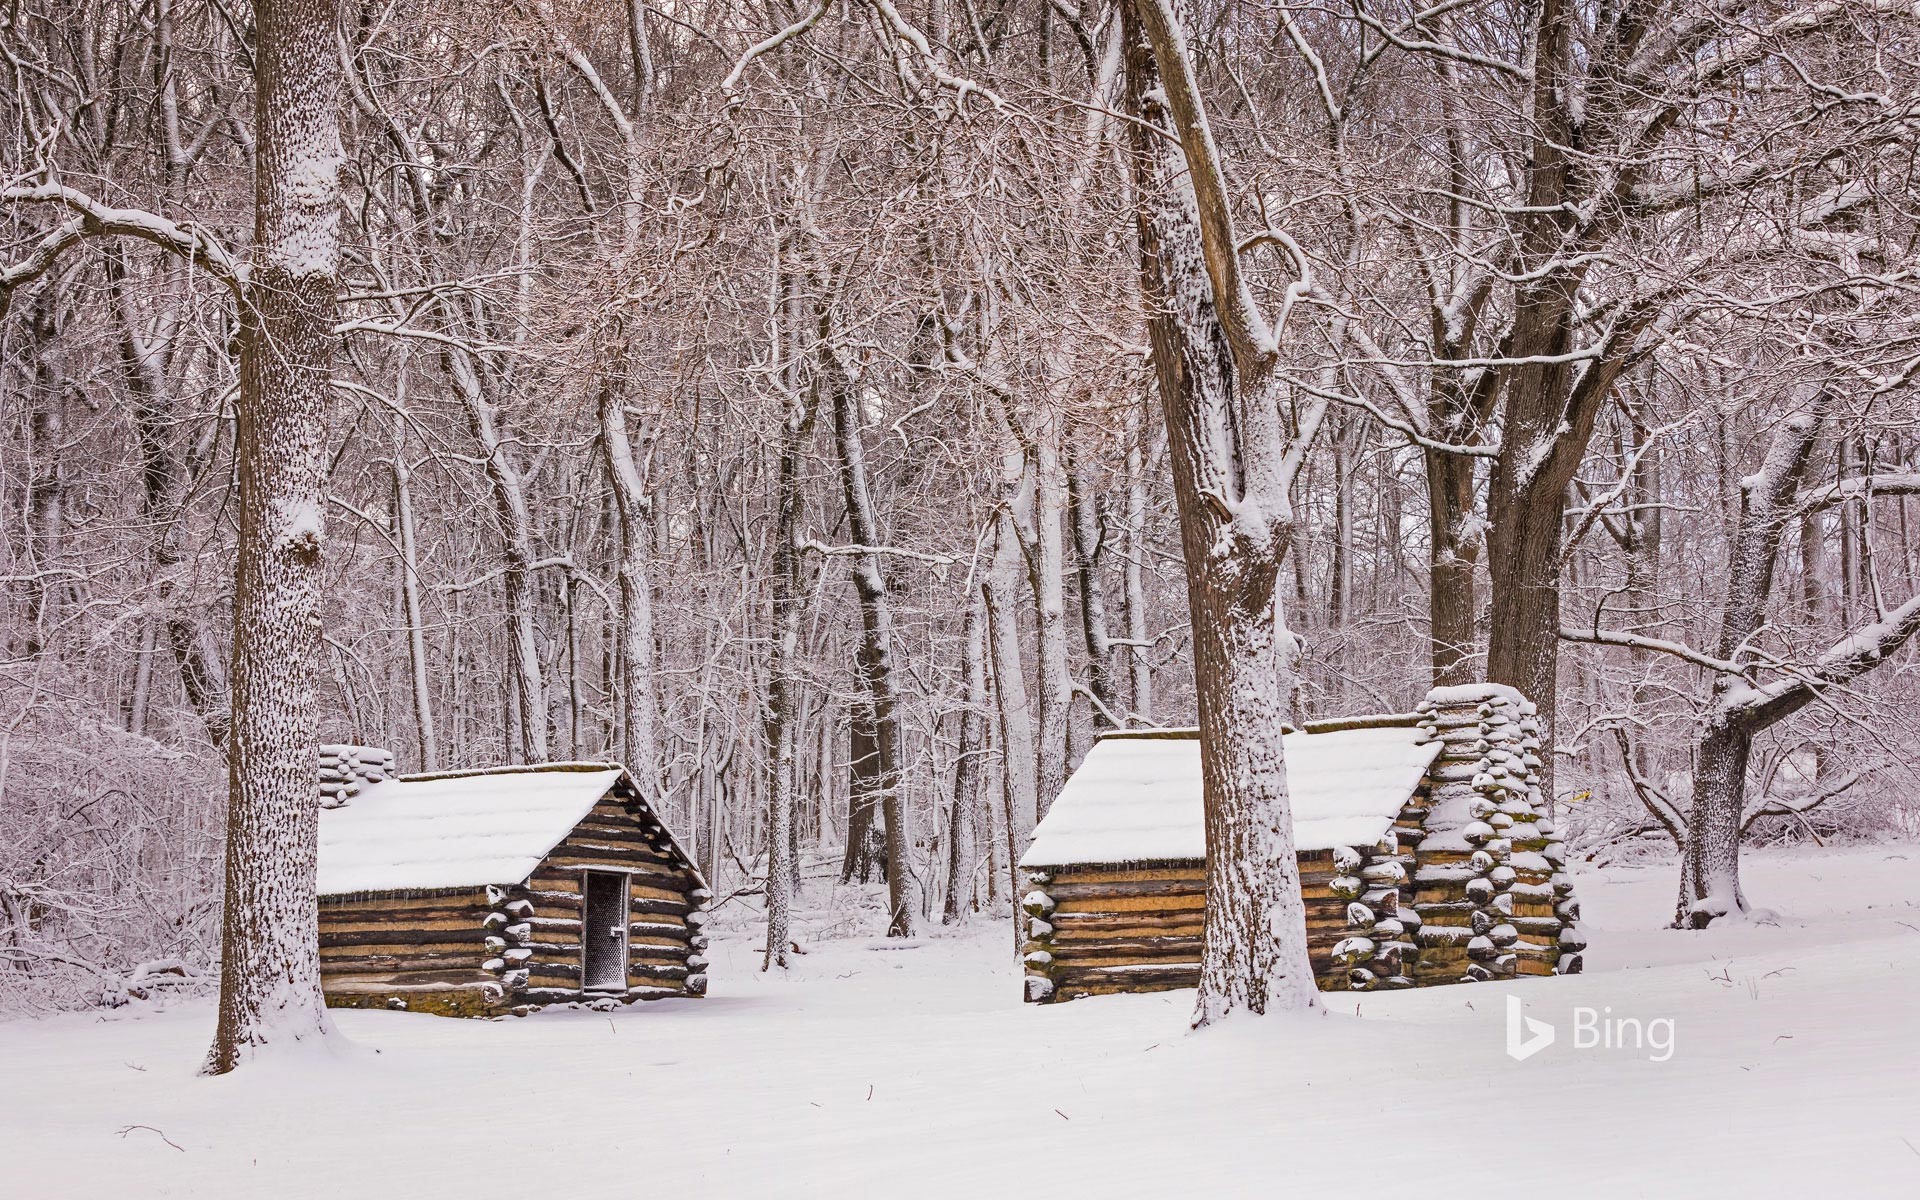 Cabins in Valley Forge National Historical Park, Pennsylvania